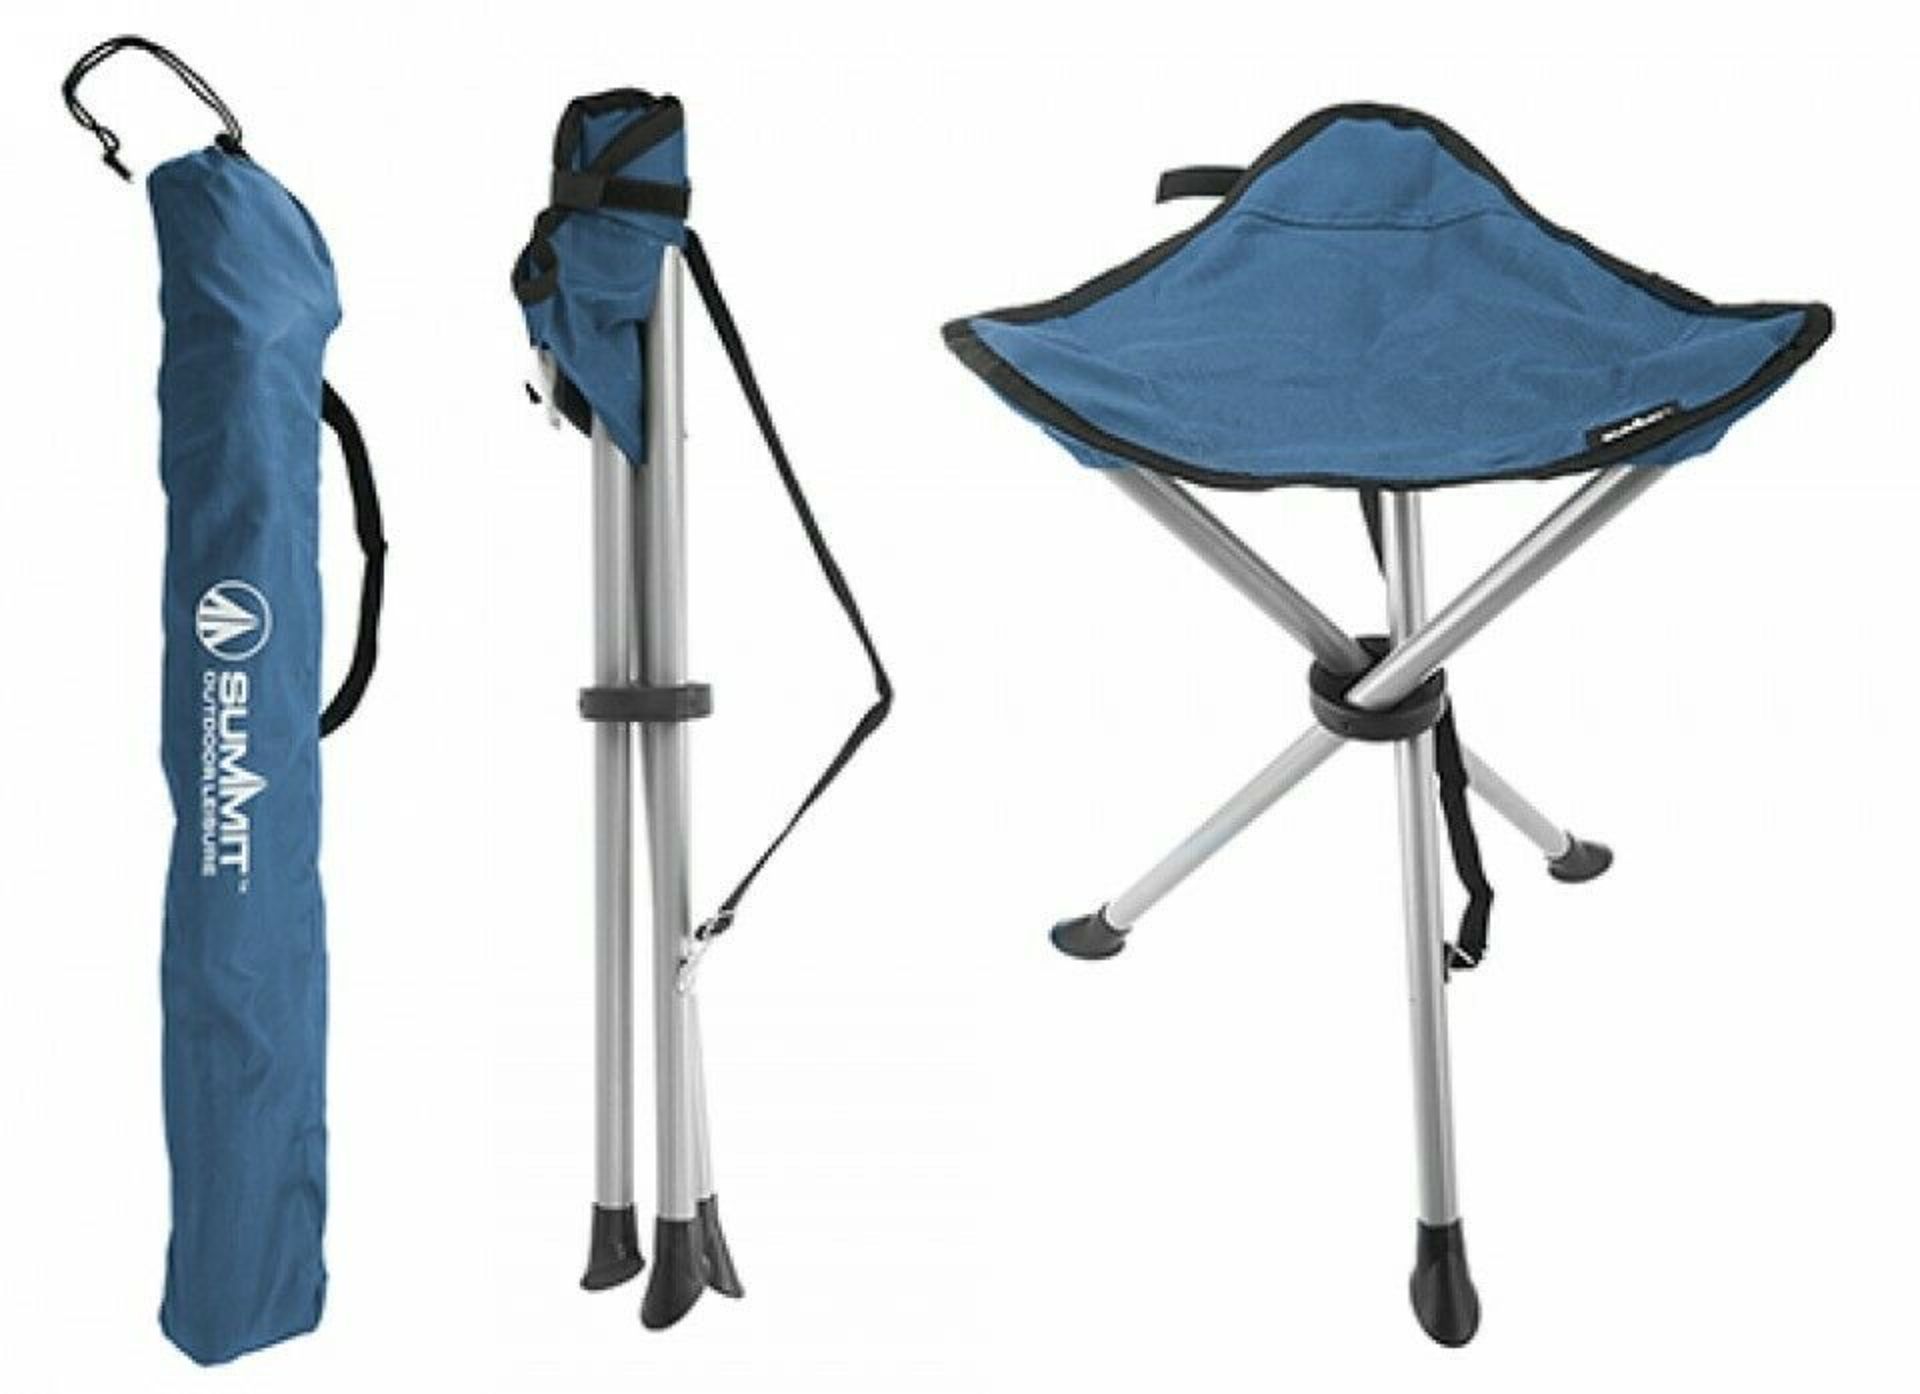 New Summit Tripod Stool With Carry Bag - Blue